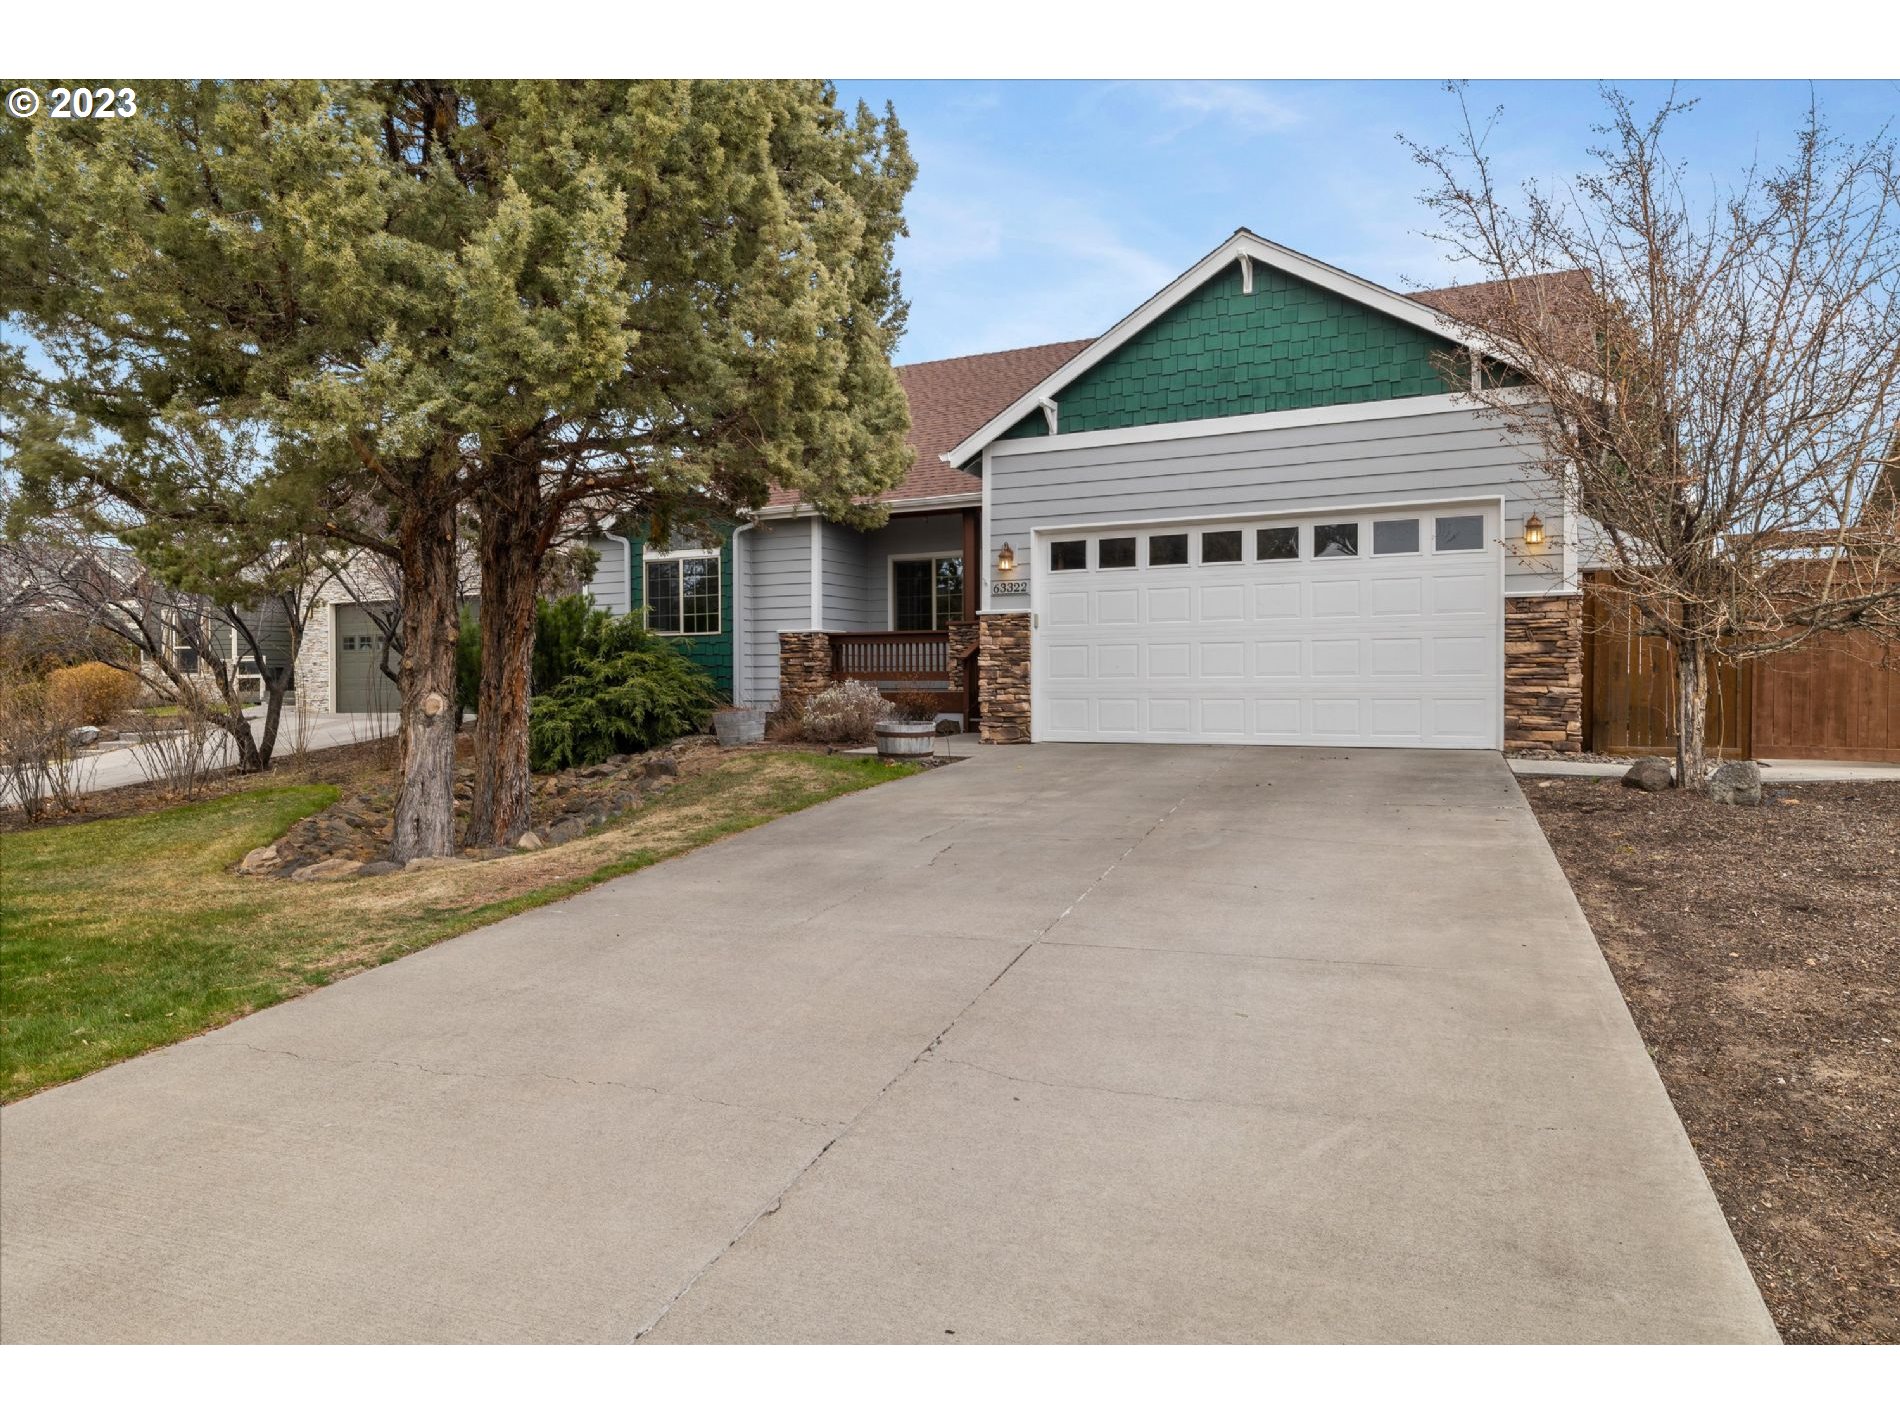 63322 BRIGHTWATER DR, Bend, OR 97701